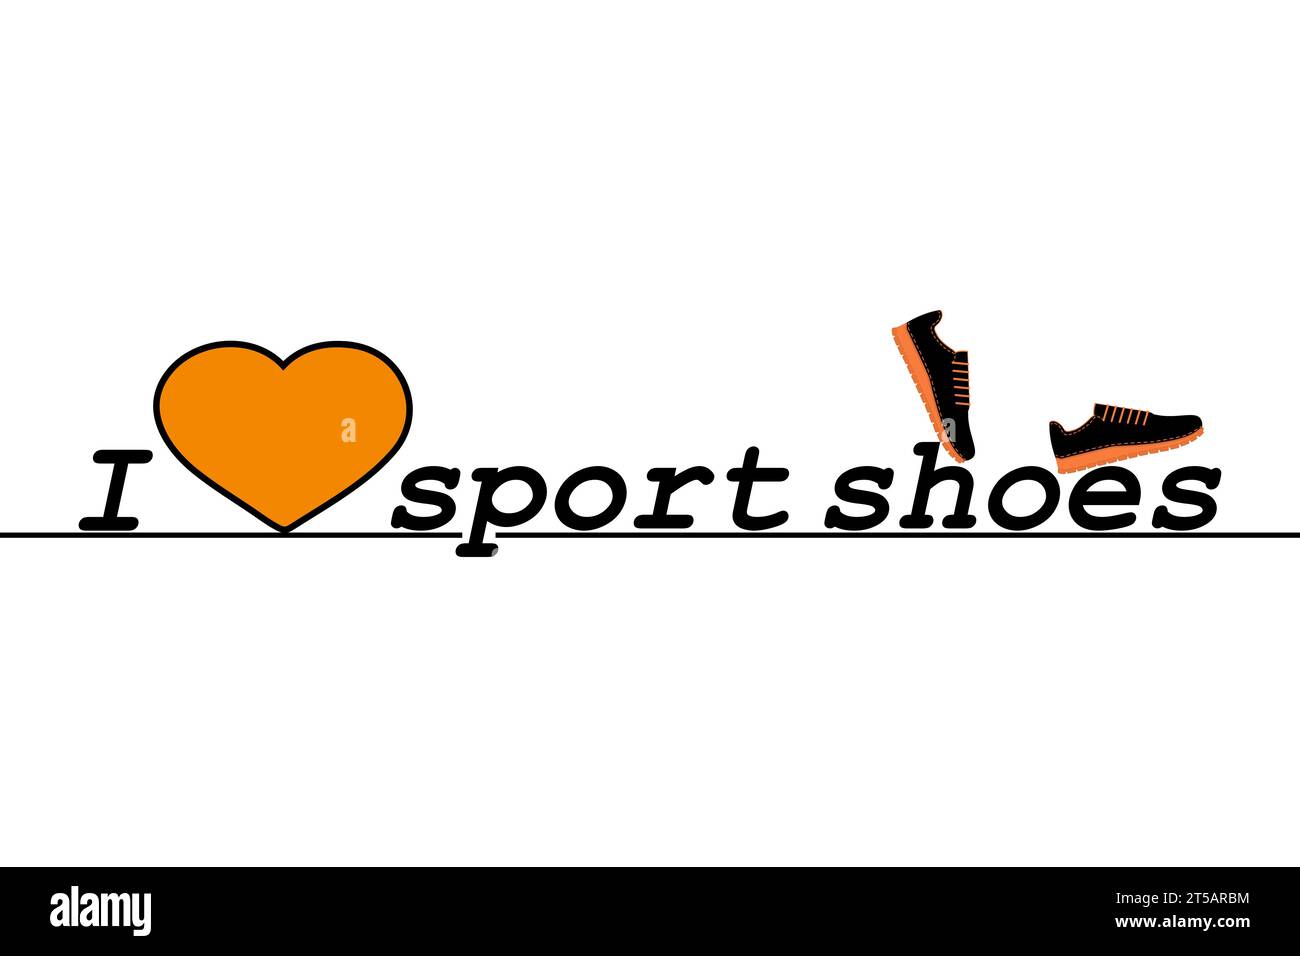 I love sport shoes. Text, slogan. A pair of sneakers, gym shoes and a heart. Isolated vector illustration on white background. Flat style. Stock Vector